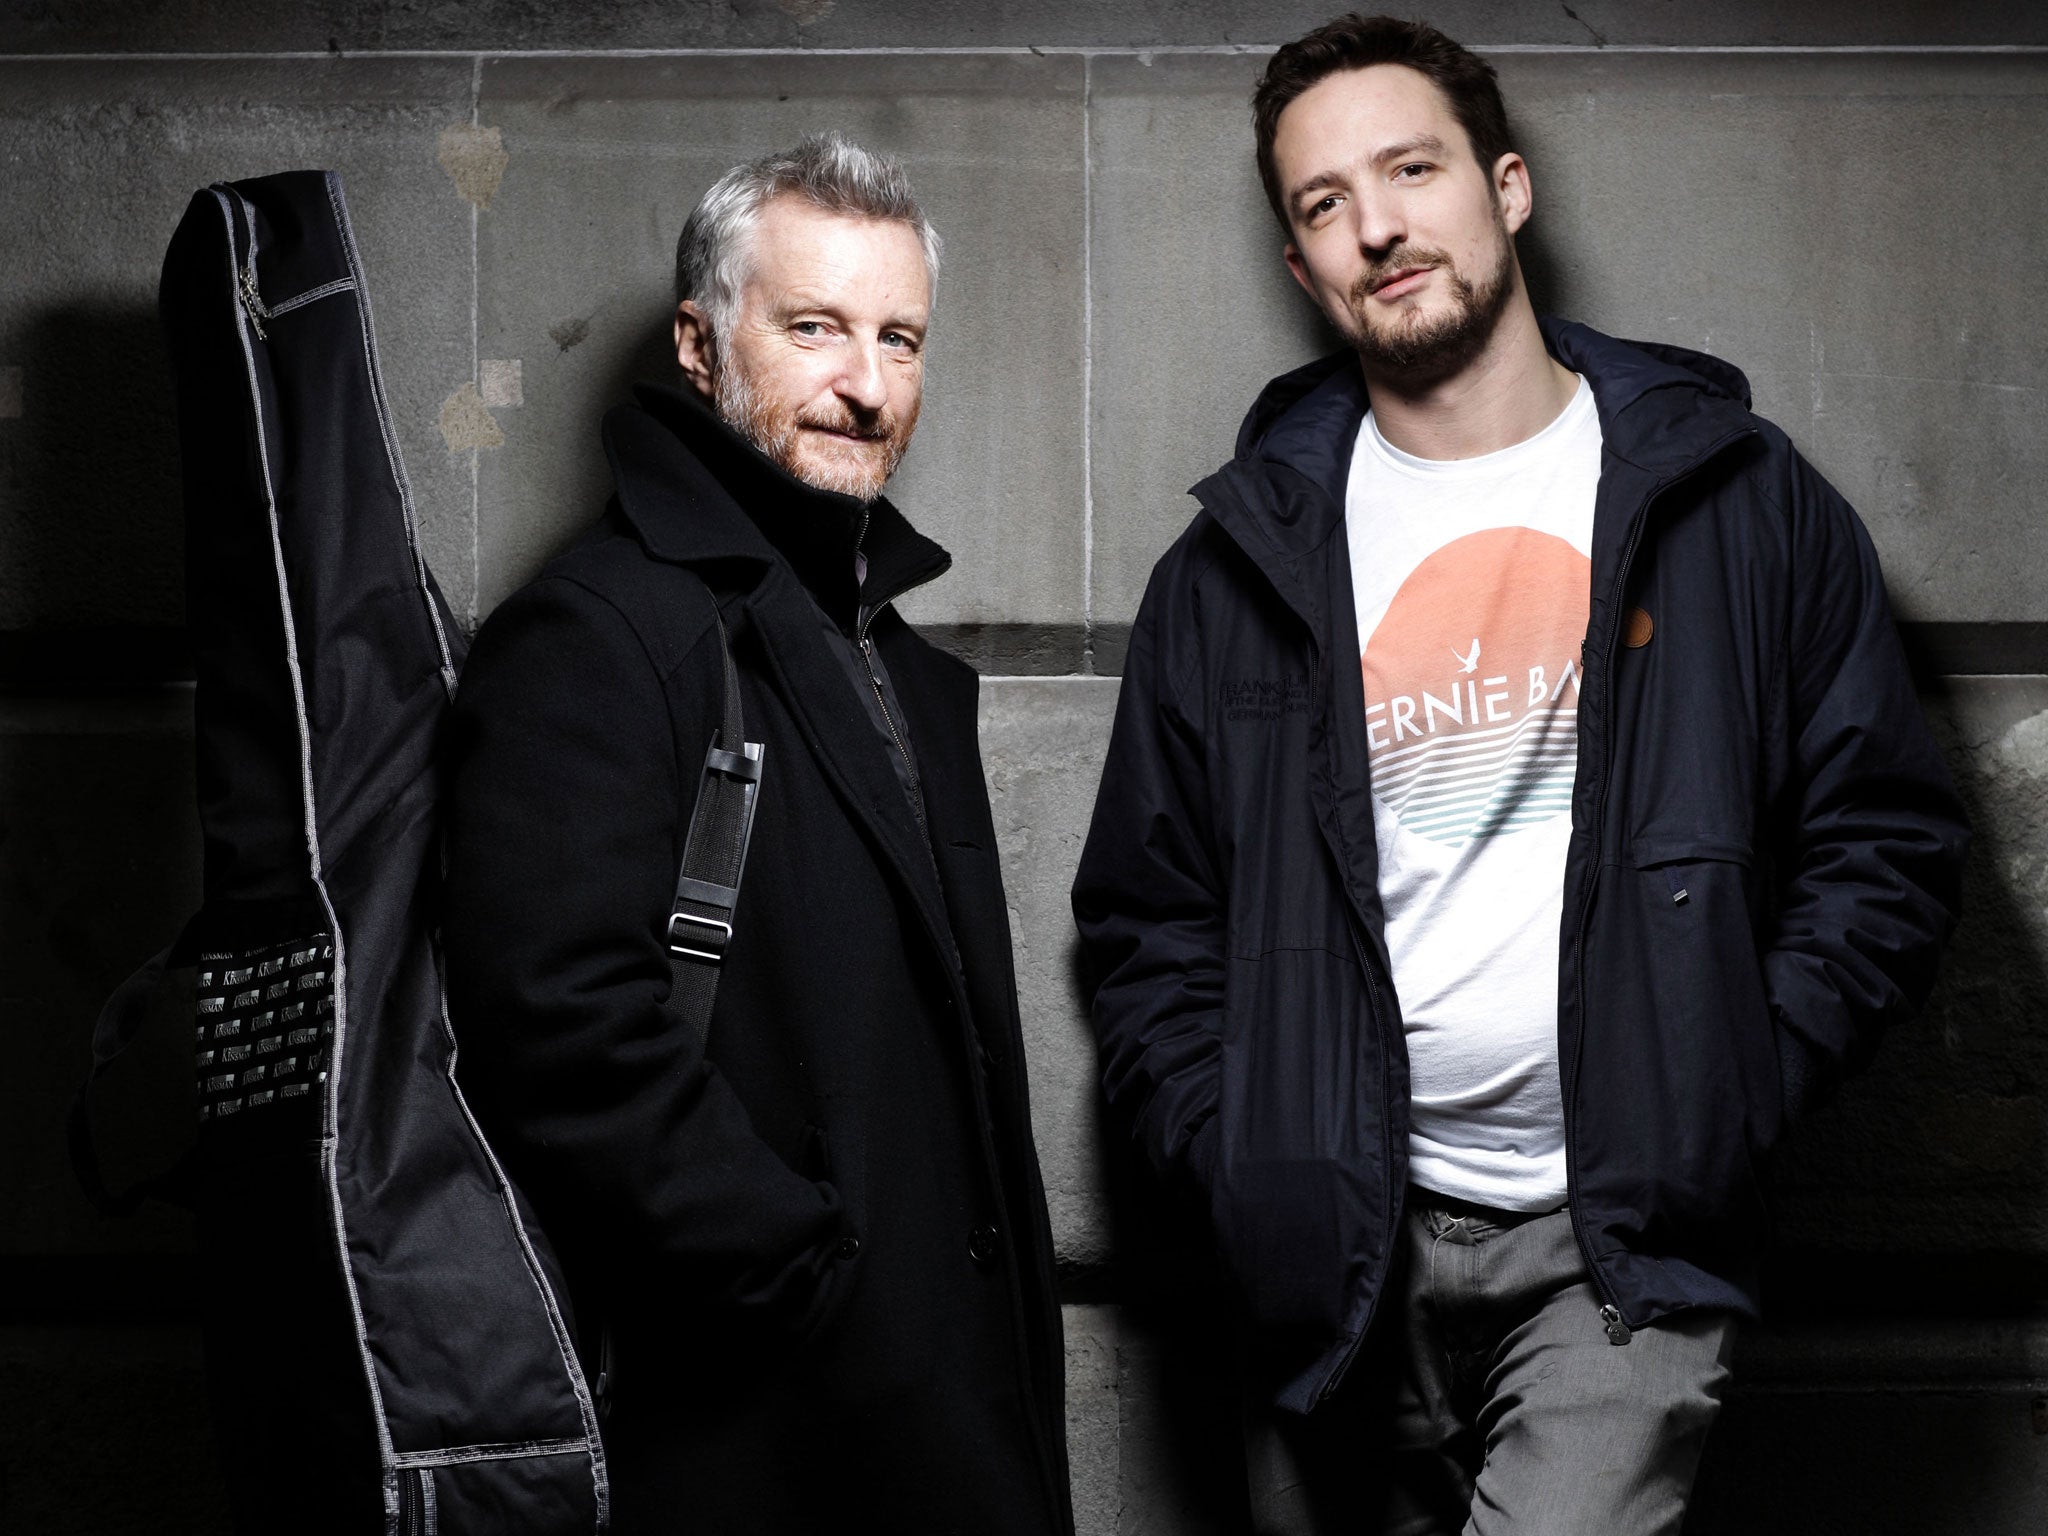 Billy Bragg and Frank Turner are combining their talents with two shows this week in support of the homelessness charity Shelter